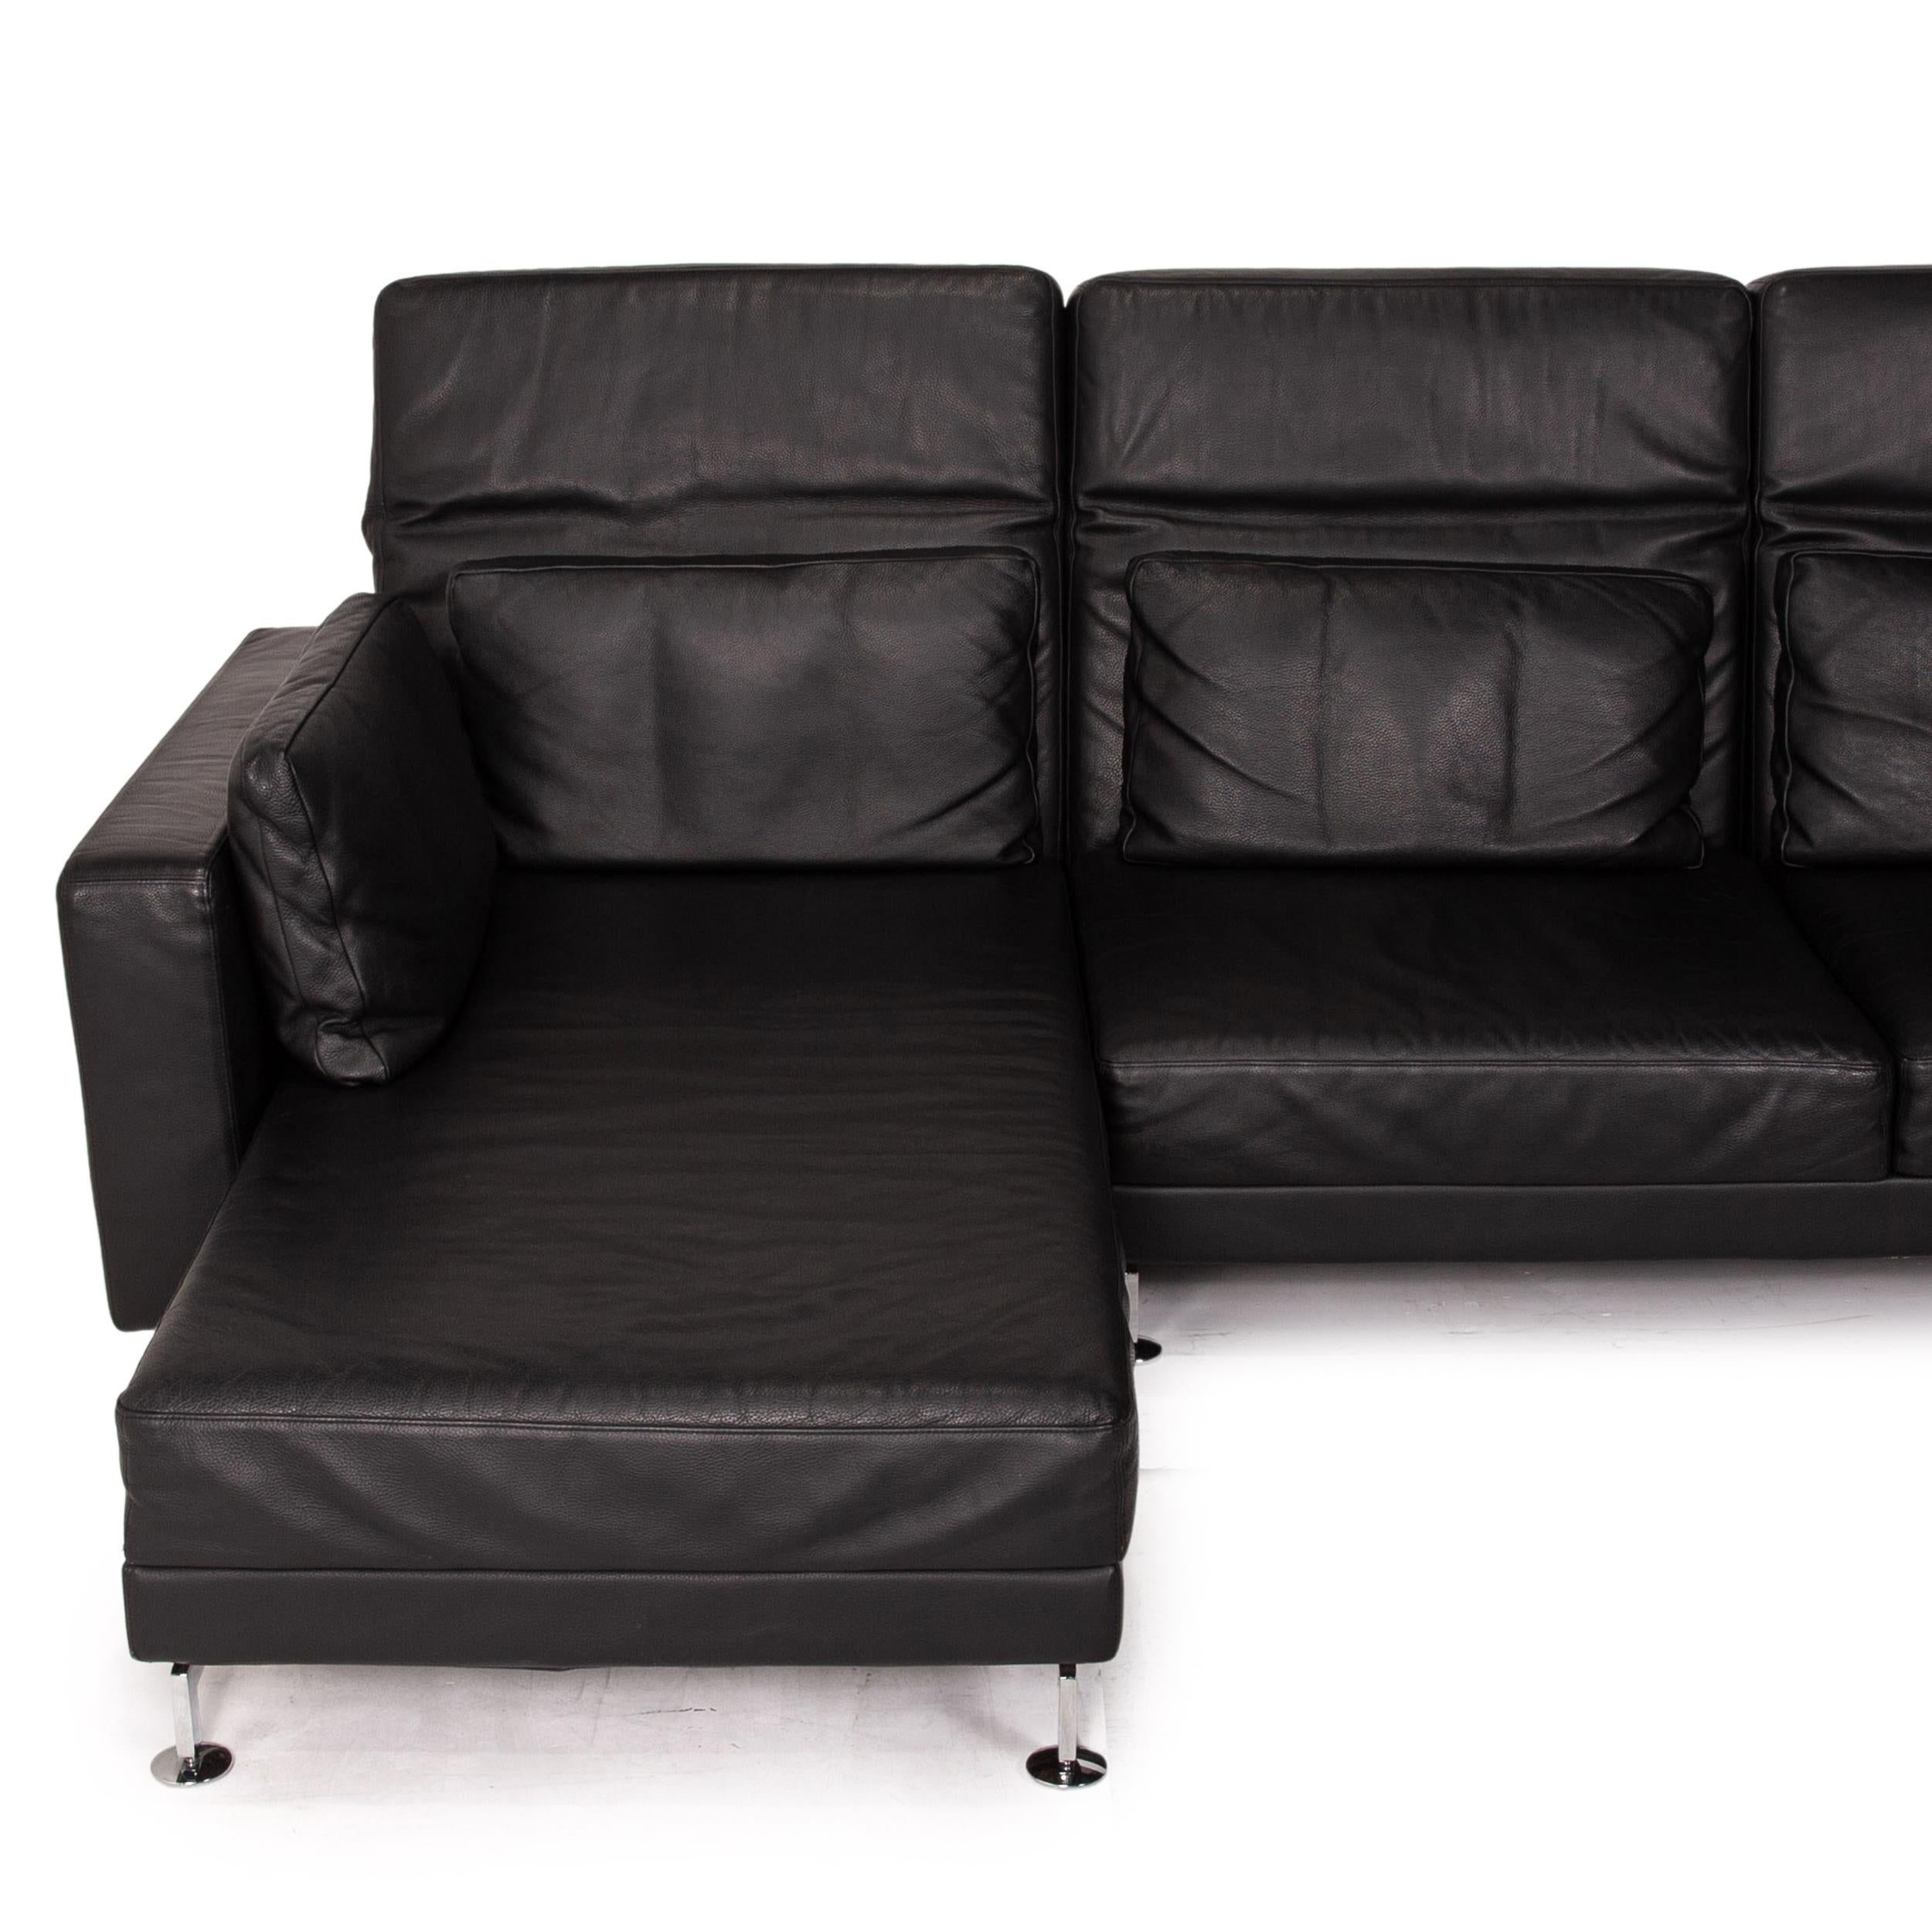 Brühl & Sippold Moule Leather Corner Sofa Black Function Relax Function Couch 3